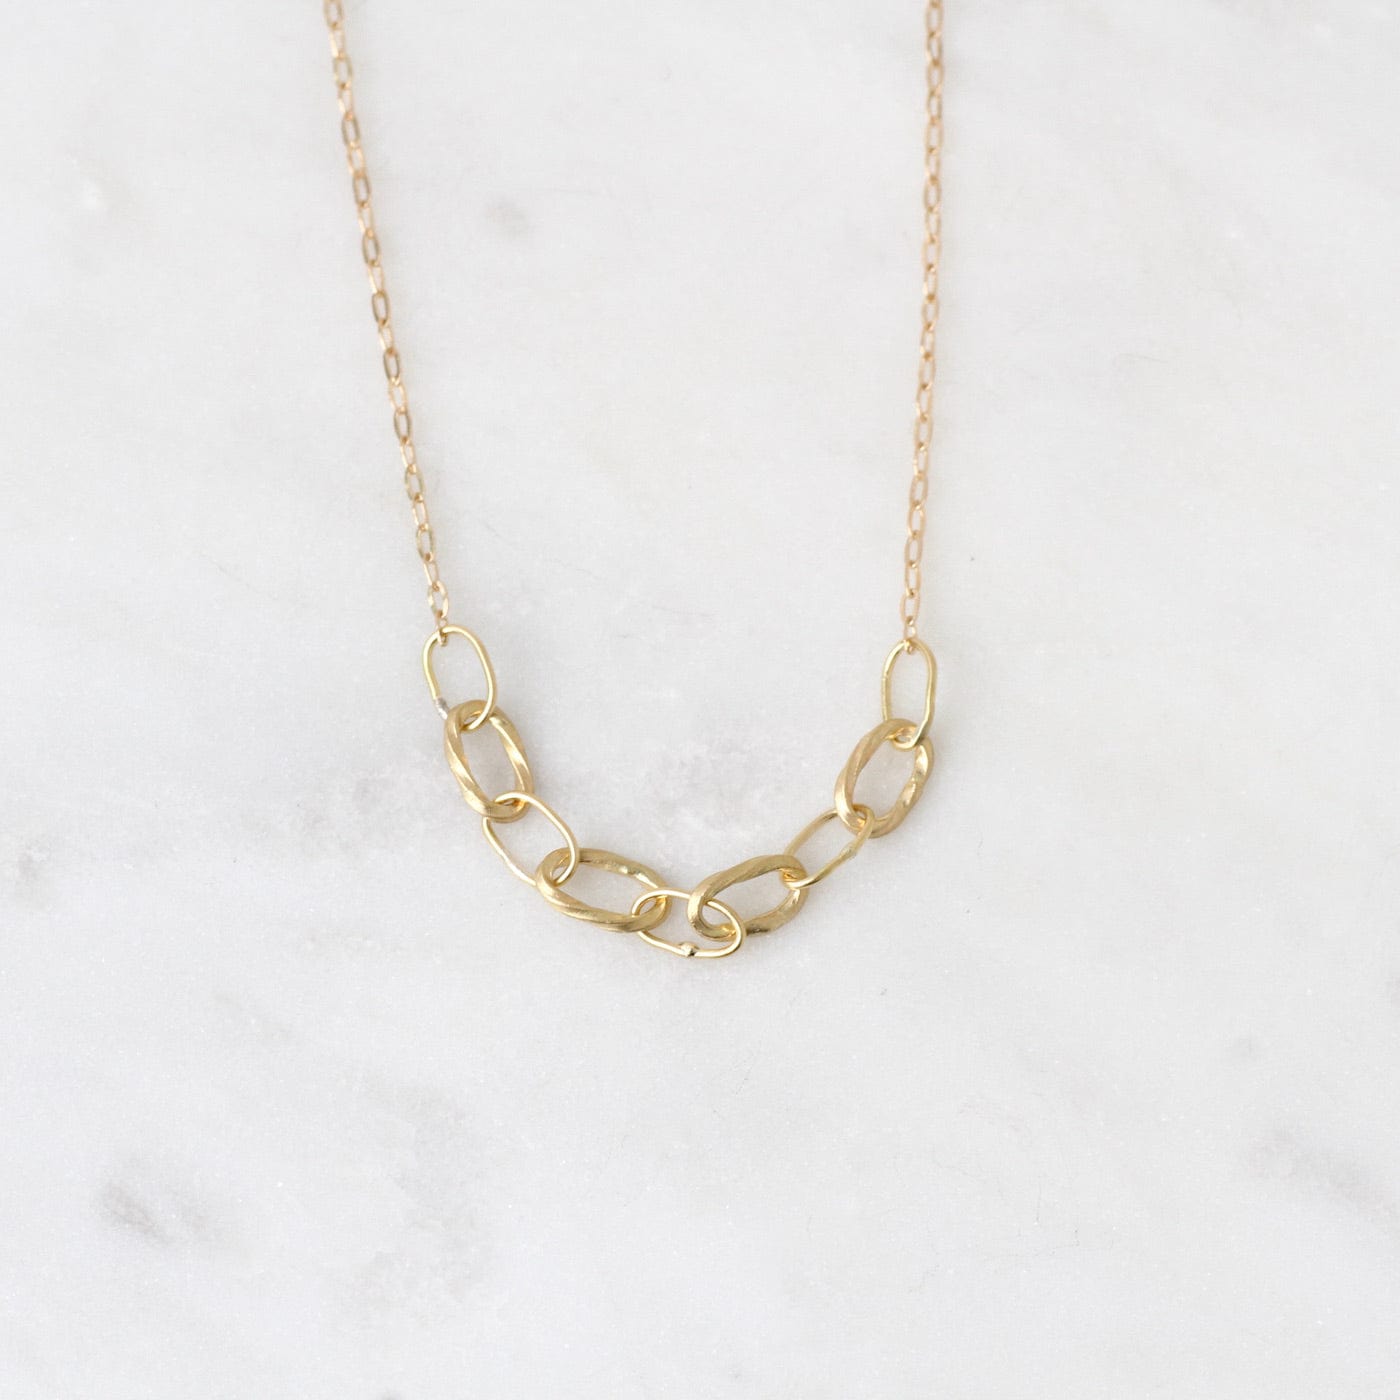 Load image into Gallery viewer, NKL-14K 18k Gold Baby Bowline Segment Necklace
